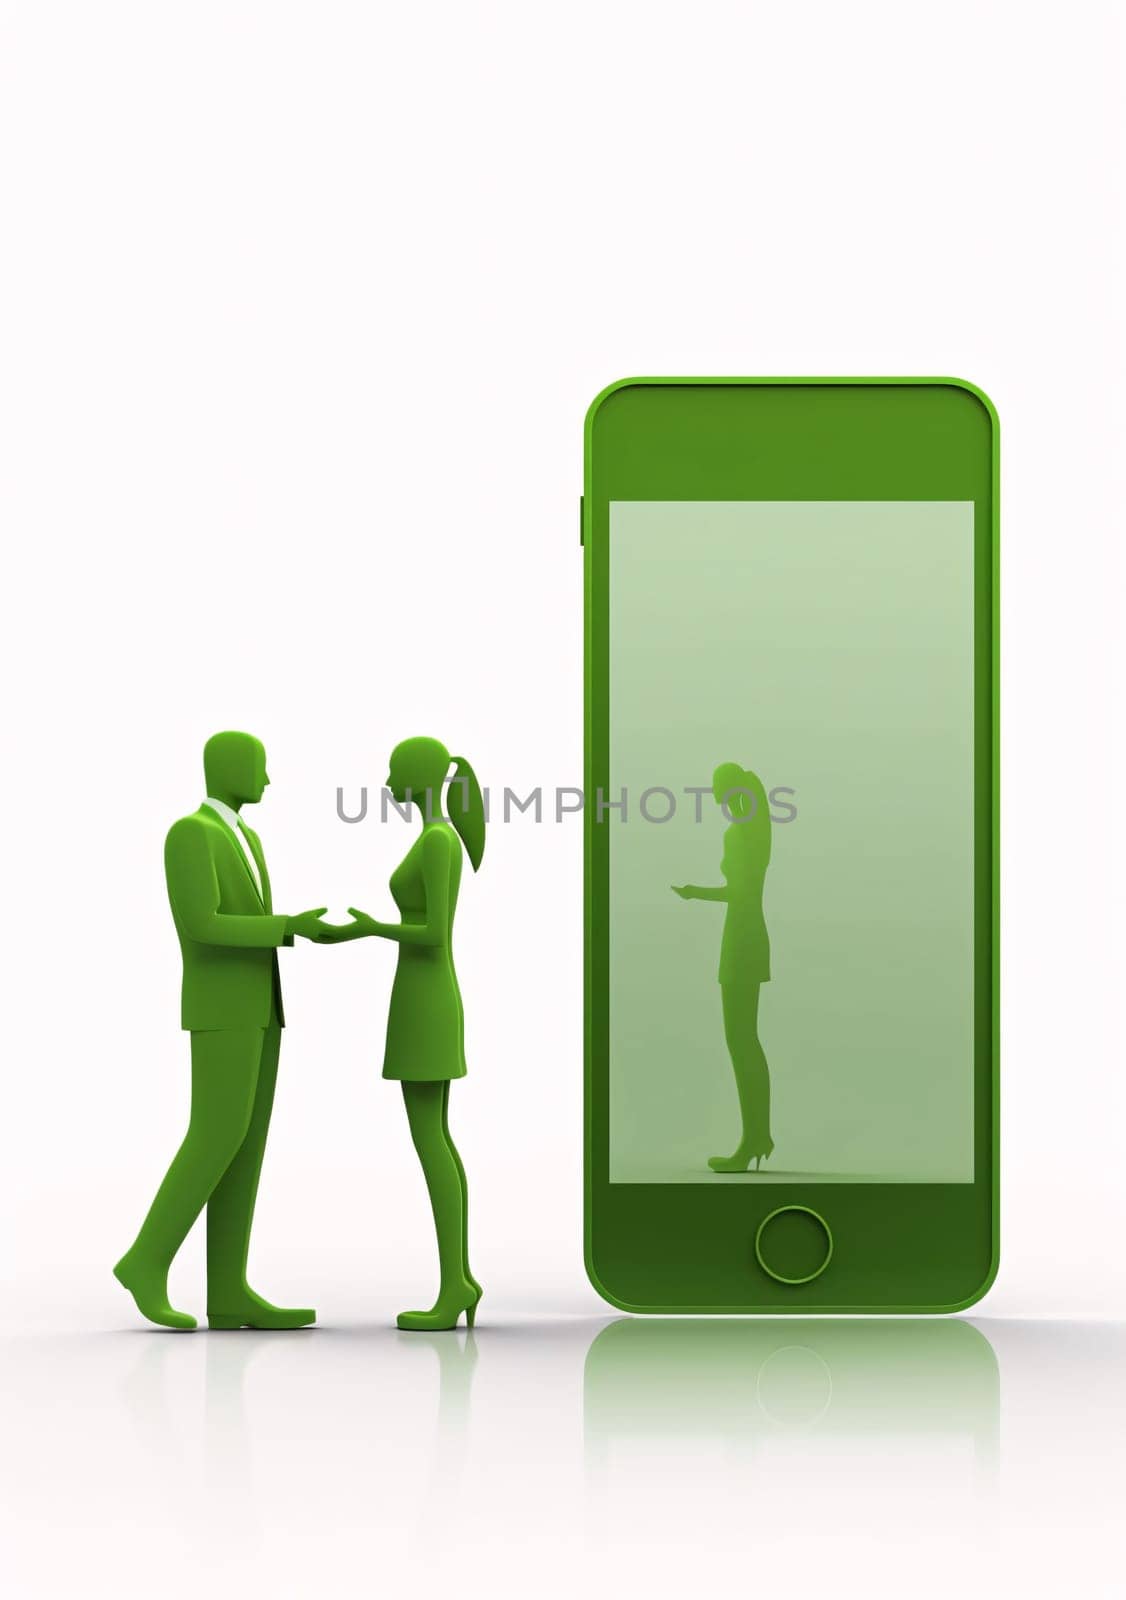 Smartphone screen: Businessman and businesswoman shaking hands with a smartphone. Business concept